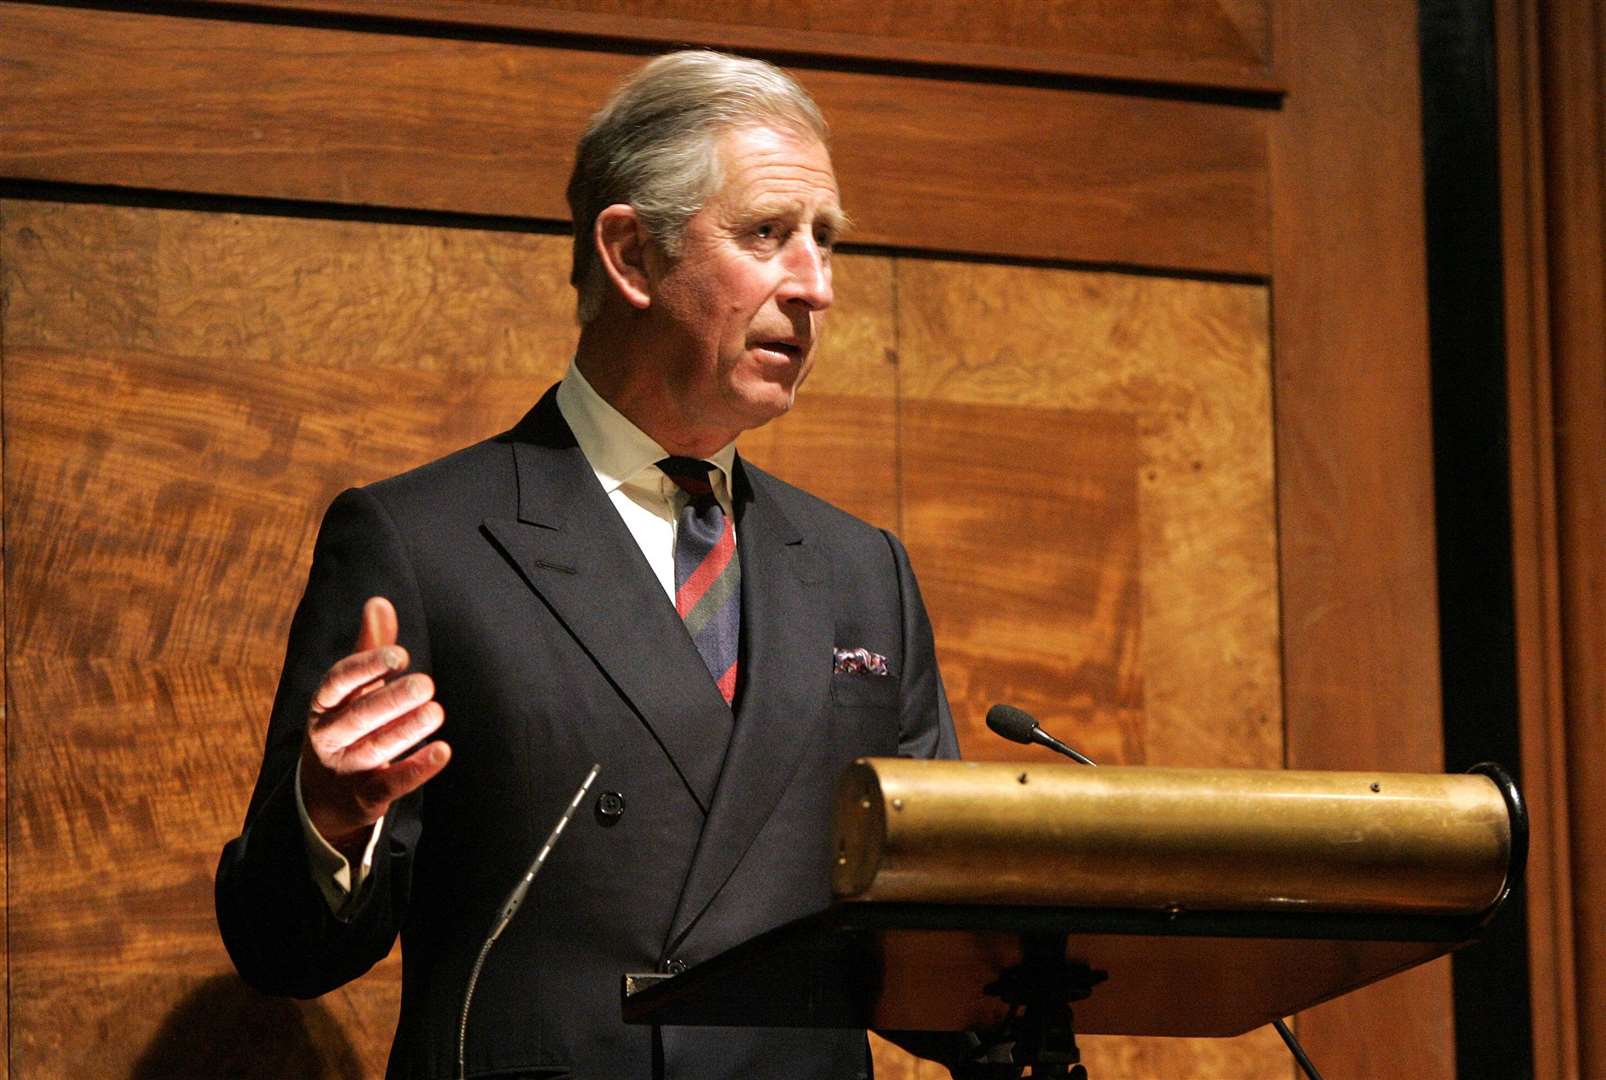 The Prince of Wales delivering his speech at the 2009 Royal Institute of British Architects Trust in London (Alastair Grant/PA)